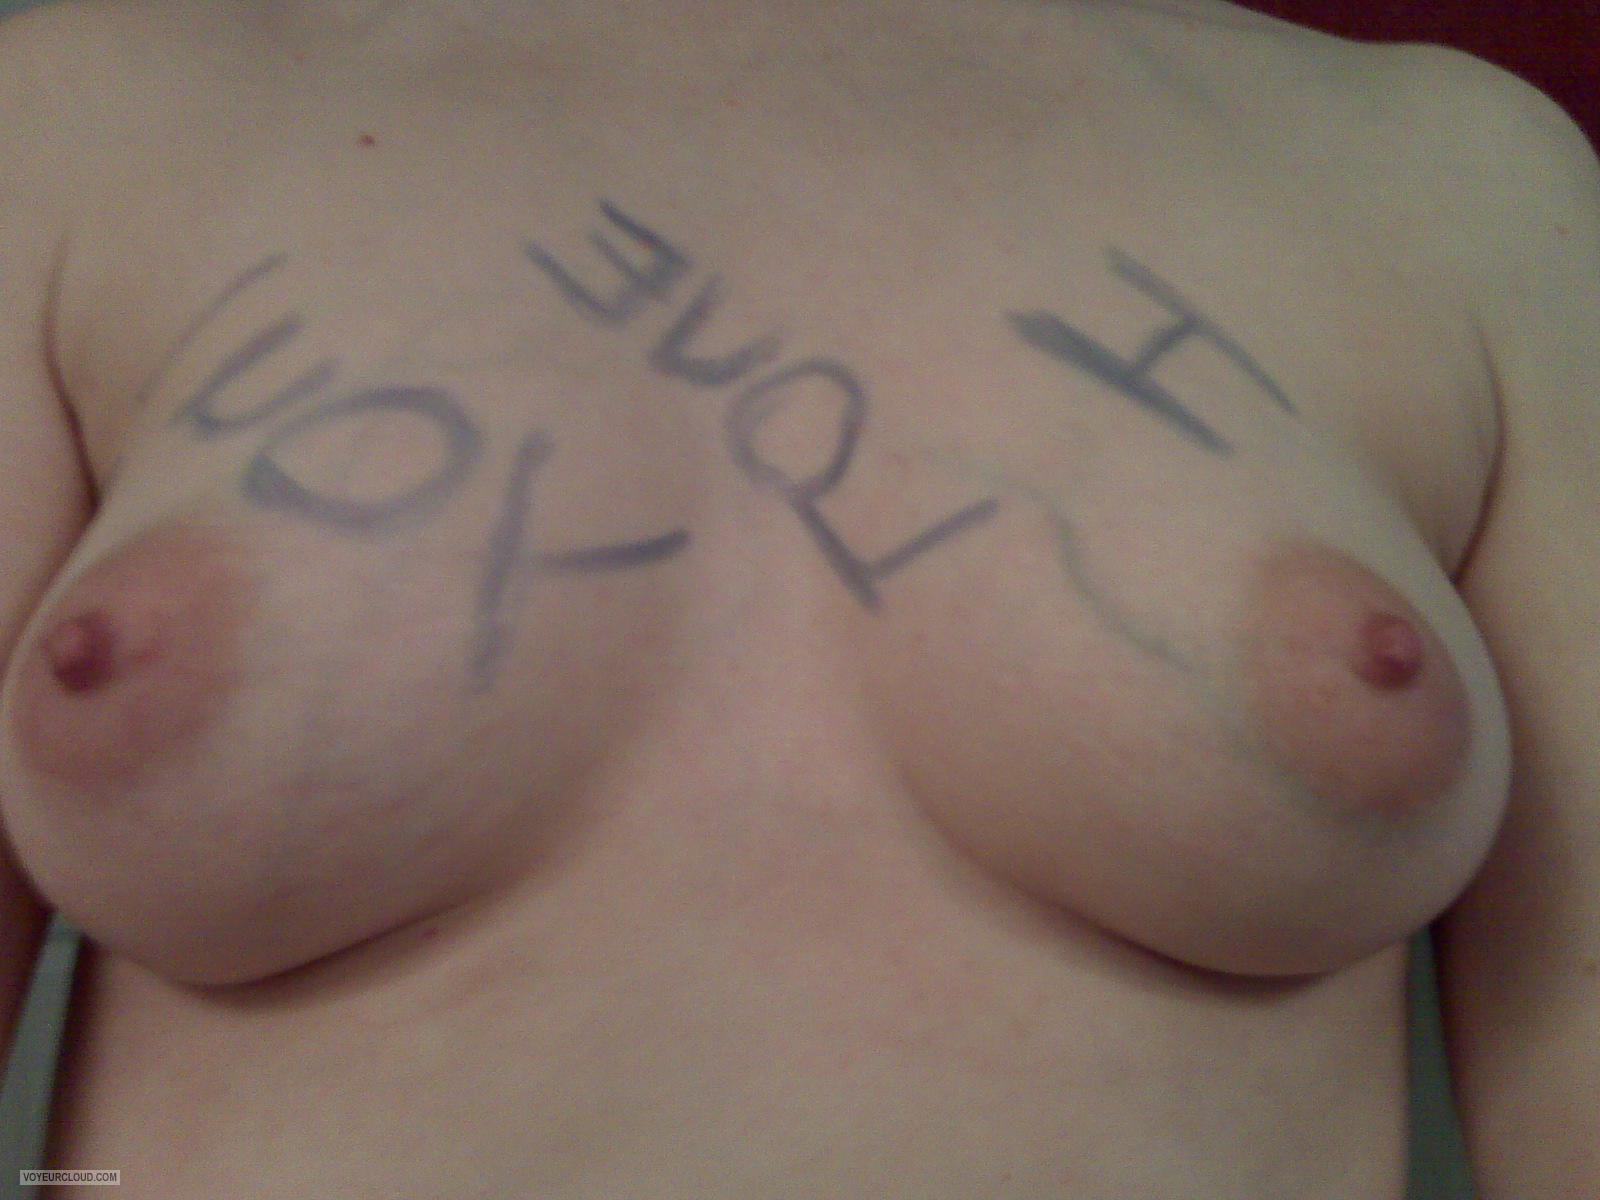 Small Tits Of My Wife Selfie by KKitty